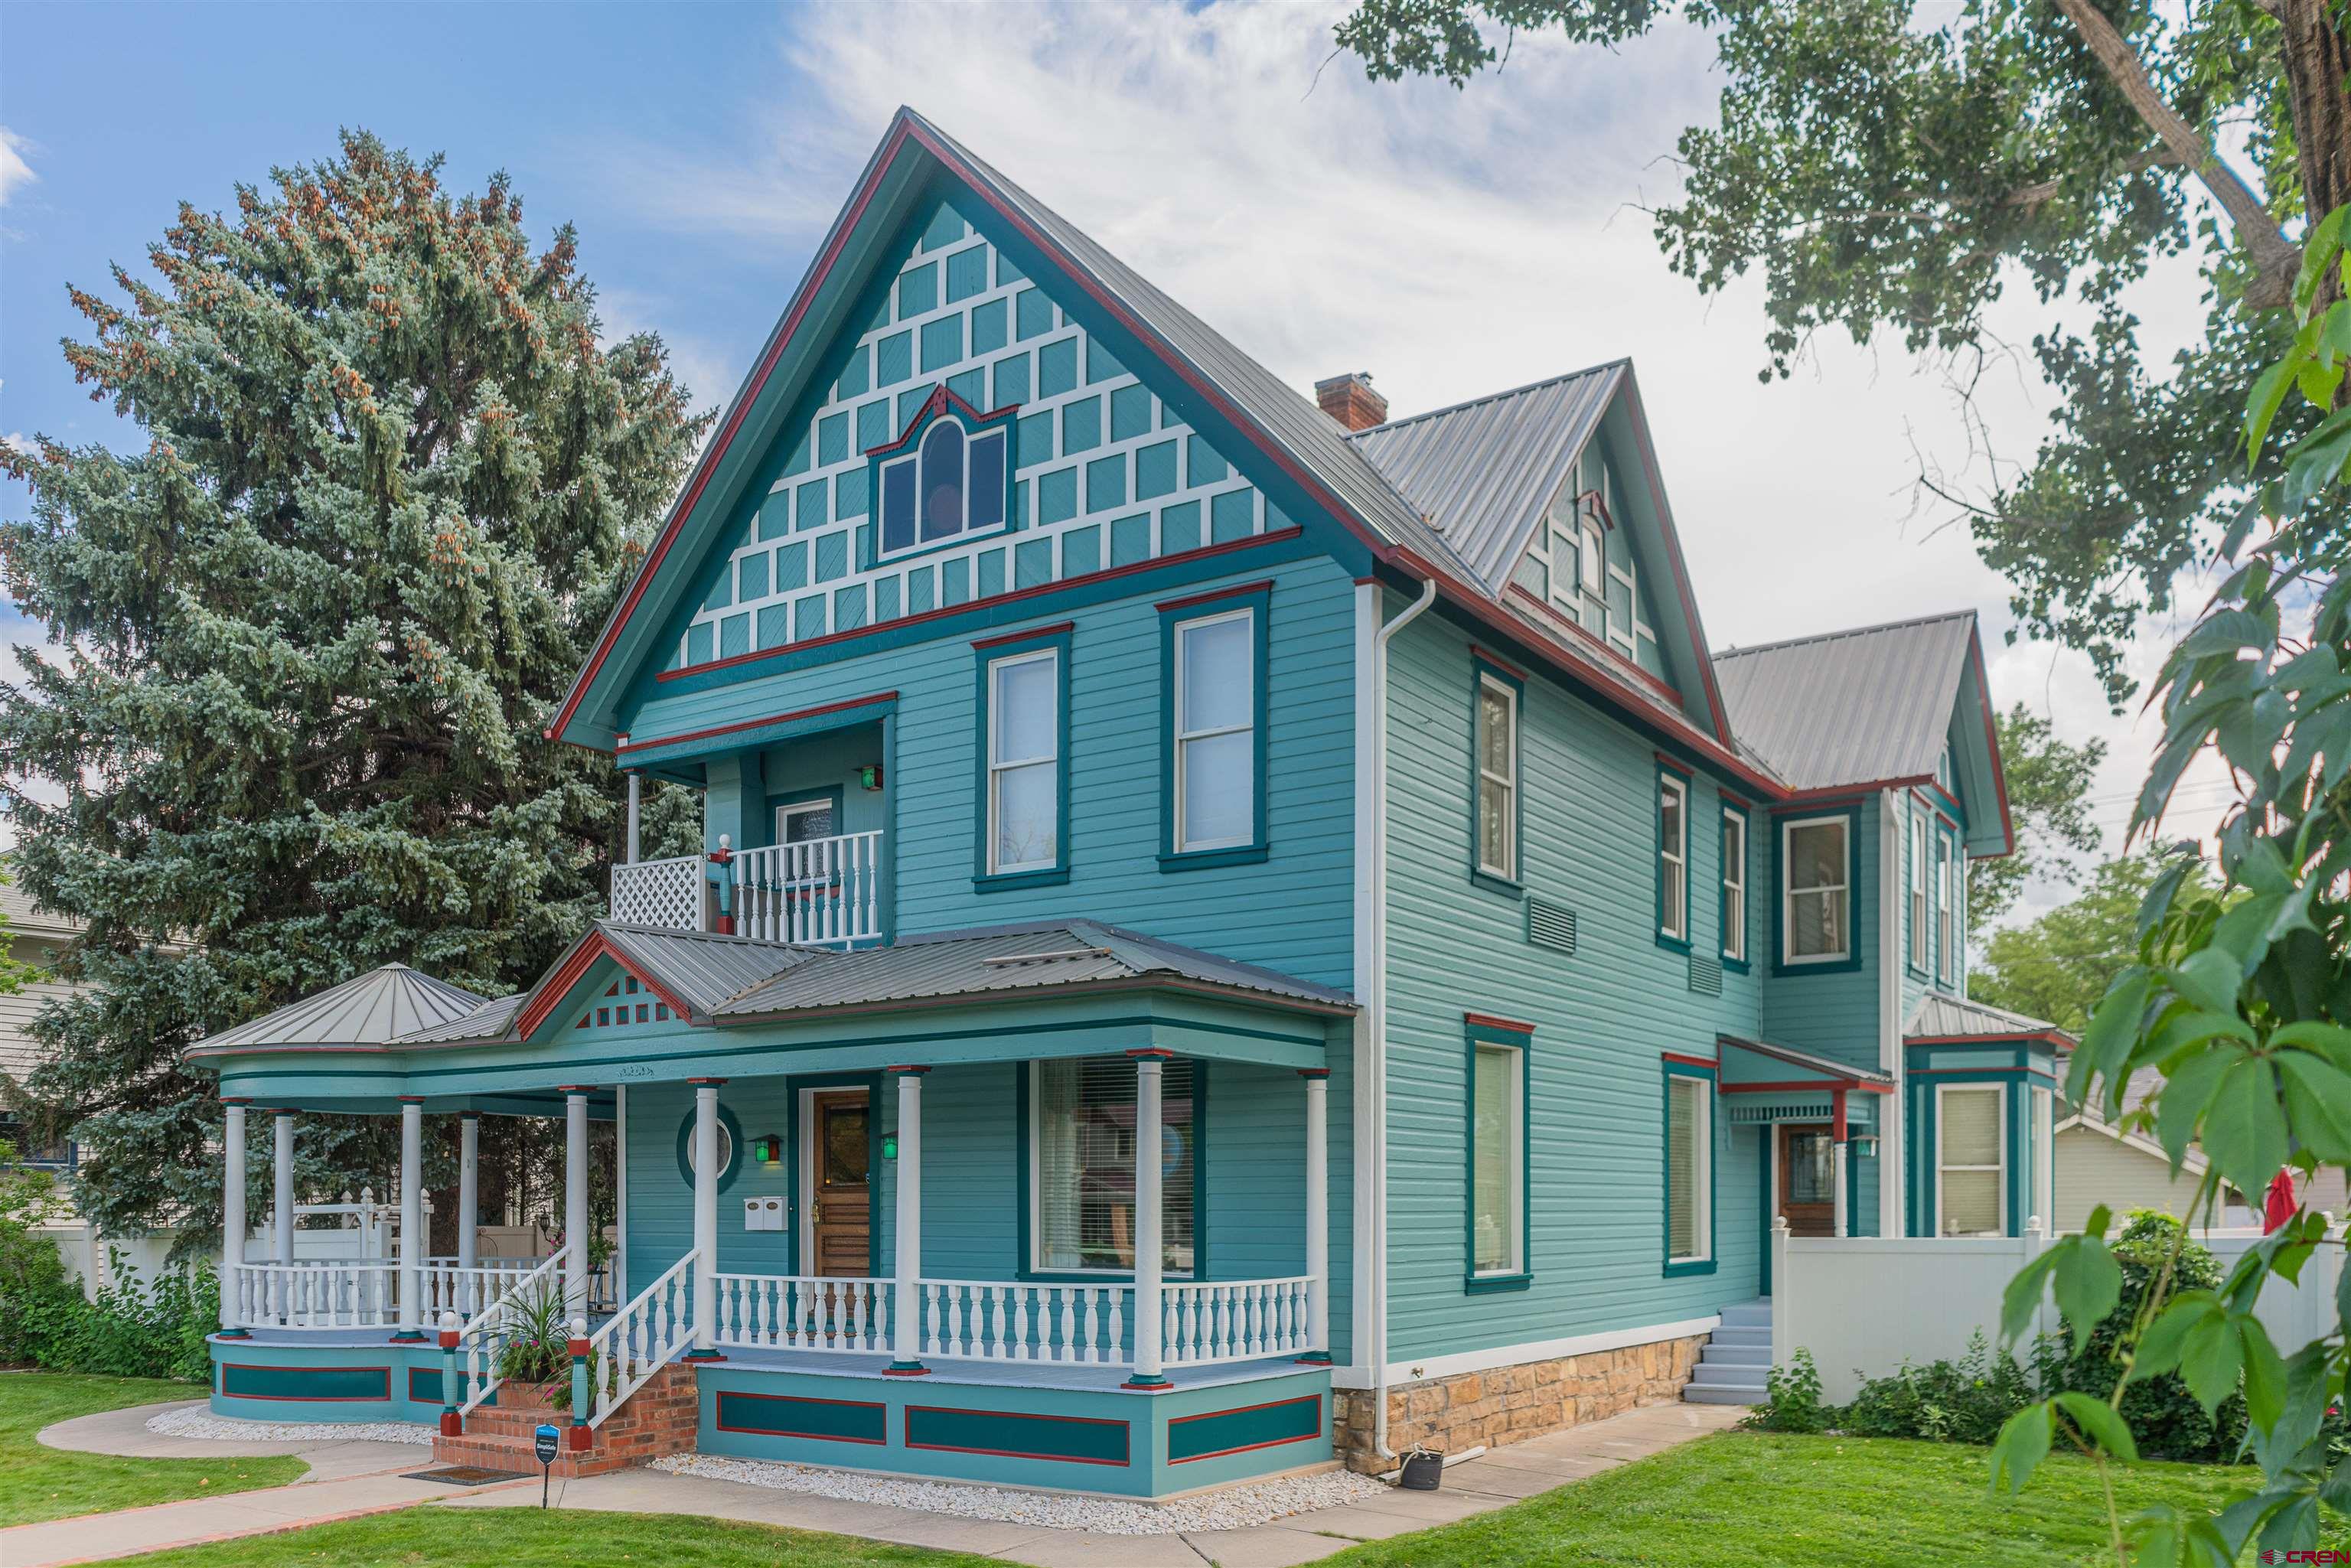 AN INCREDIBLE OPPORTUNITY AWAITS YOU TO OWN A HOME WITH  HISTORIC CHARM IN THE HEART OF DOWNTOWN MONTROSE,CO.  Originally constructed in 1902 for J.V. and Emma Lathrop's family, this architecturally impressive home embodies a period of Montrose history. The Lathrop House was listed on the National Register of Historic Places in 1988 and is one of Montrose's most well recognized buildings on Main Street with its beautiful architecture and simple classic lines. This Victorian home was the most expensive built in the town around the time of construction and the largest.  Today, this home boasts 6 bedrooms and 5 baths total, with several living spaces, an office, a formal dining room, chef's kitchen, 2 built in fireplaces and a beautiful wrap-around porch designed by Emma Lathrop herself. WHILE THIS PROPERTY WAS PREVIOUSLY A BED AND BREAKFAST, THE FOCUS NOW MAY BE BETTER SUITED AS AN INVESTMENT PROPERTY OF 3 RENTALS.  THE GROSS RENTAL INCOME IS ESTIMATED AT 5-6,000 A MONTH FOR ALL THREE UNITS.  The attention to detail from the columns and scrollwork to the wallpaper and stained-glass windows throughout in this home are a must see. Schedule a tour today!  INCLUSIONS MAY BE PURCHASED BY A BILL OF SALE.   THE EXTERIOR OF THE HOME WAS JUST REPAINTED WITH A NEW COLOR AND IT TRULY LOOKS BEAUTIFUL!! CALL TO SEE!  THE COST OF THAT PAINT JOB WAS APPROXIMATELY $35,000